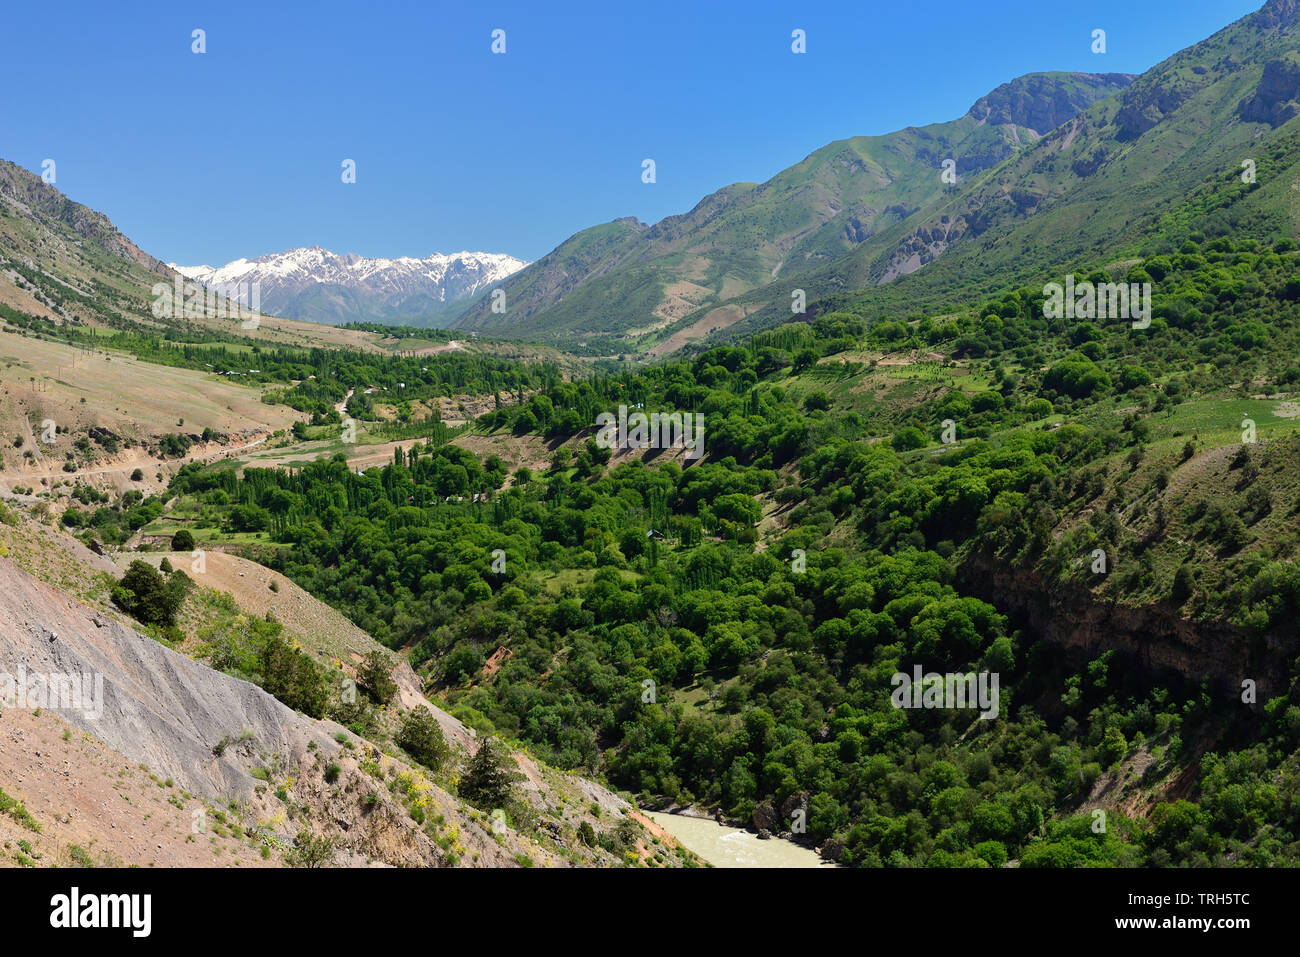 Landscape of the mountains in Ugam - Chatkal National Park, holiday destination  of hiking and adventure-sport located near the Tashkent, Uzbekistan. Stock Photo